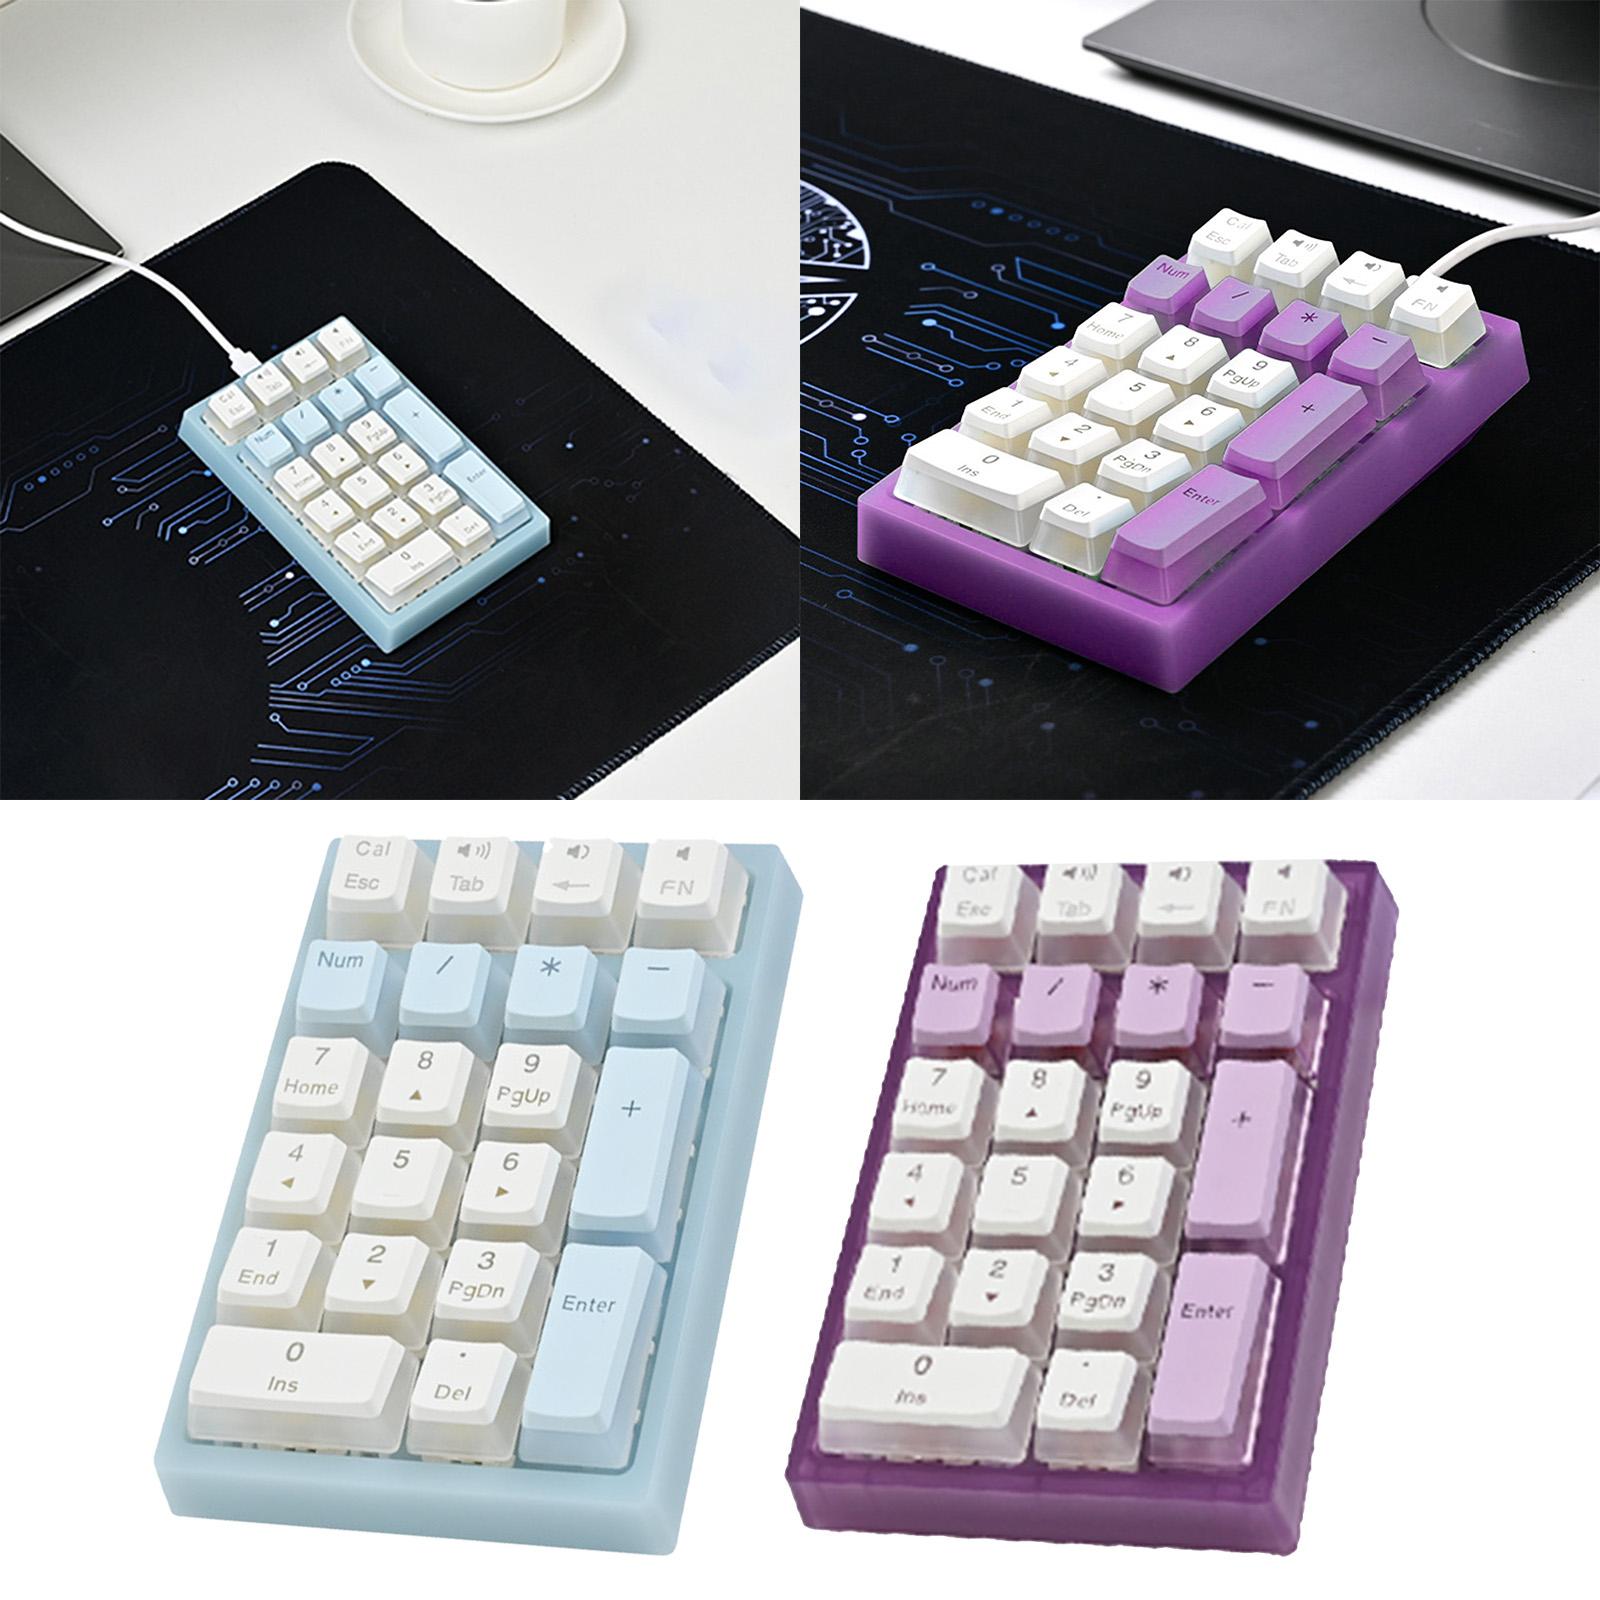 Wired Numeric Keypad Waterproof Portable for Office Home Desktop Blue